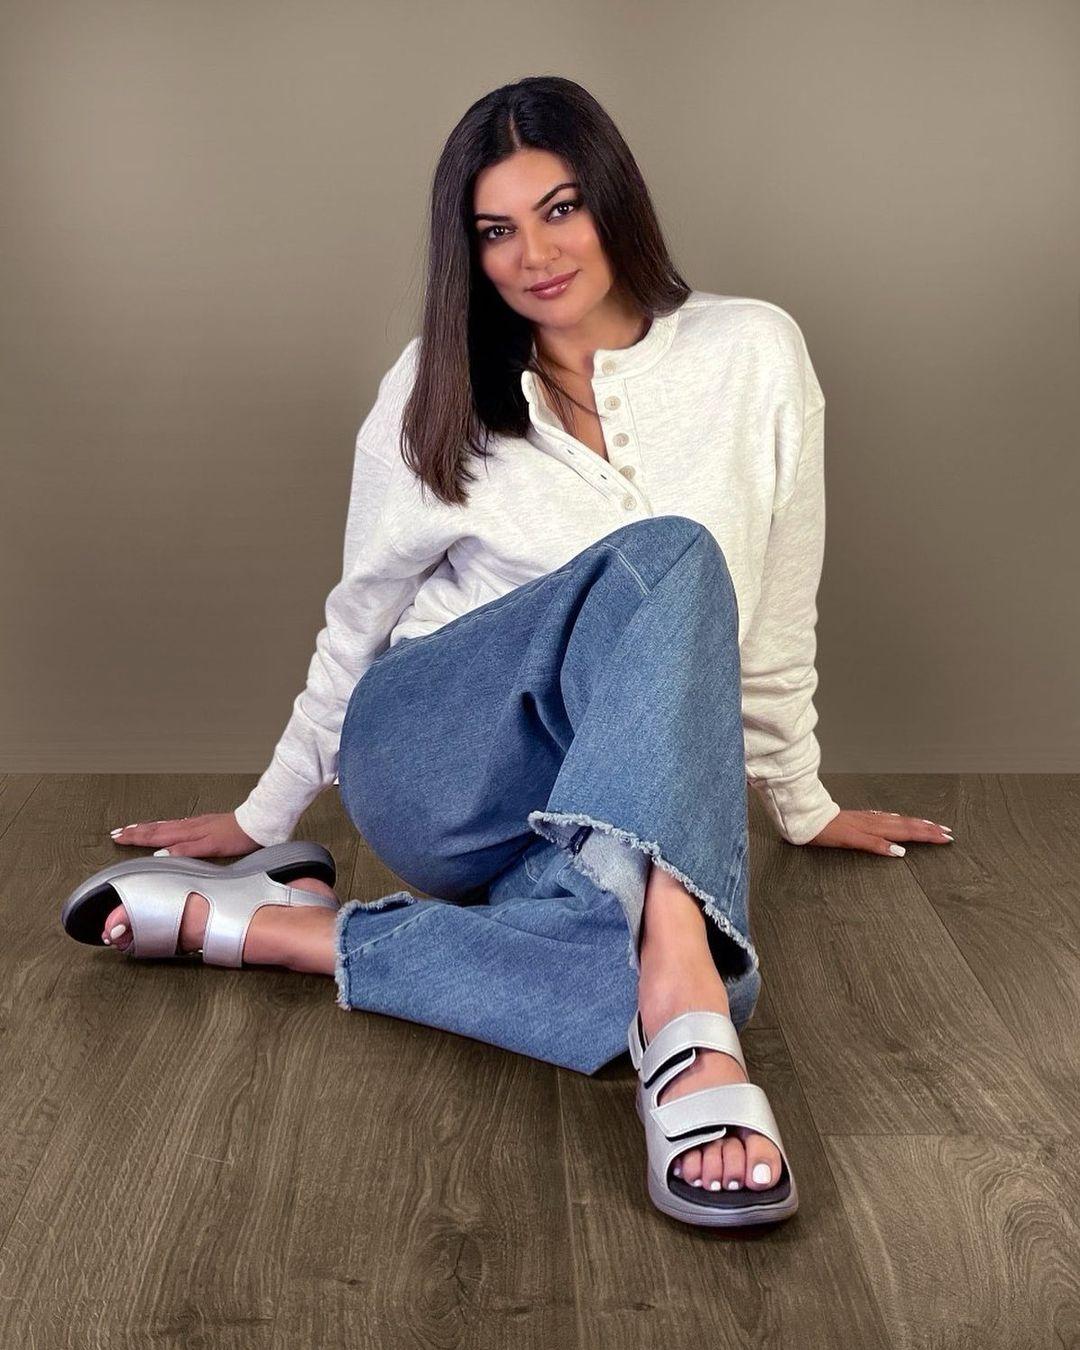 Sushmita Sen has established a one-of-a-kind place for herself in Bollywood through her wit and grit. Coming from a Bengali background, this former Miss Universe brought a new wave of talent and beauty to the Hindi film industry.